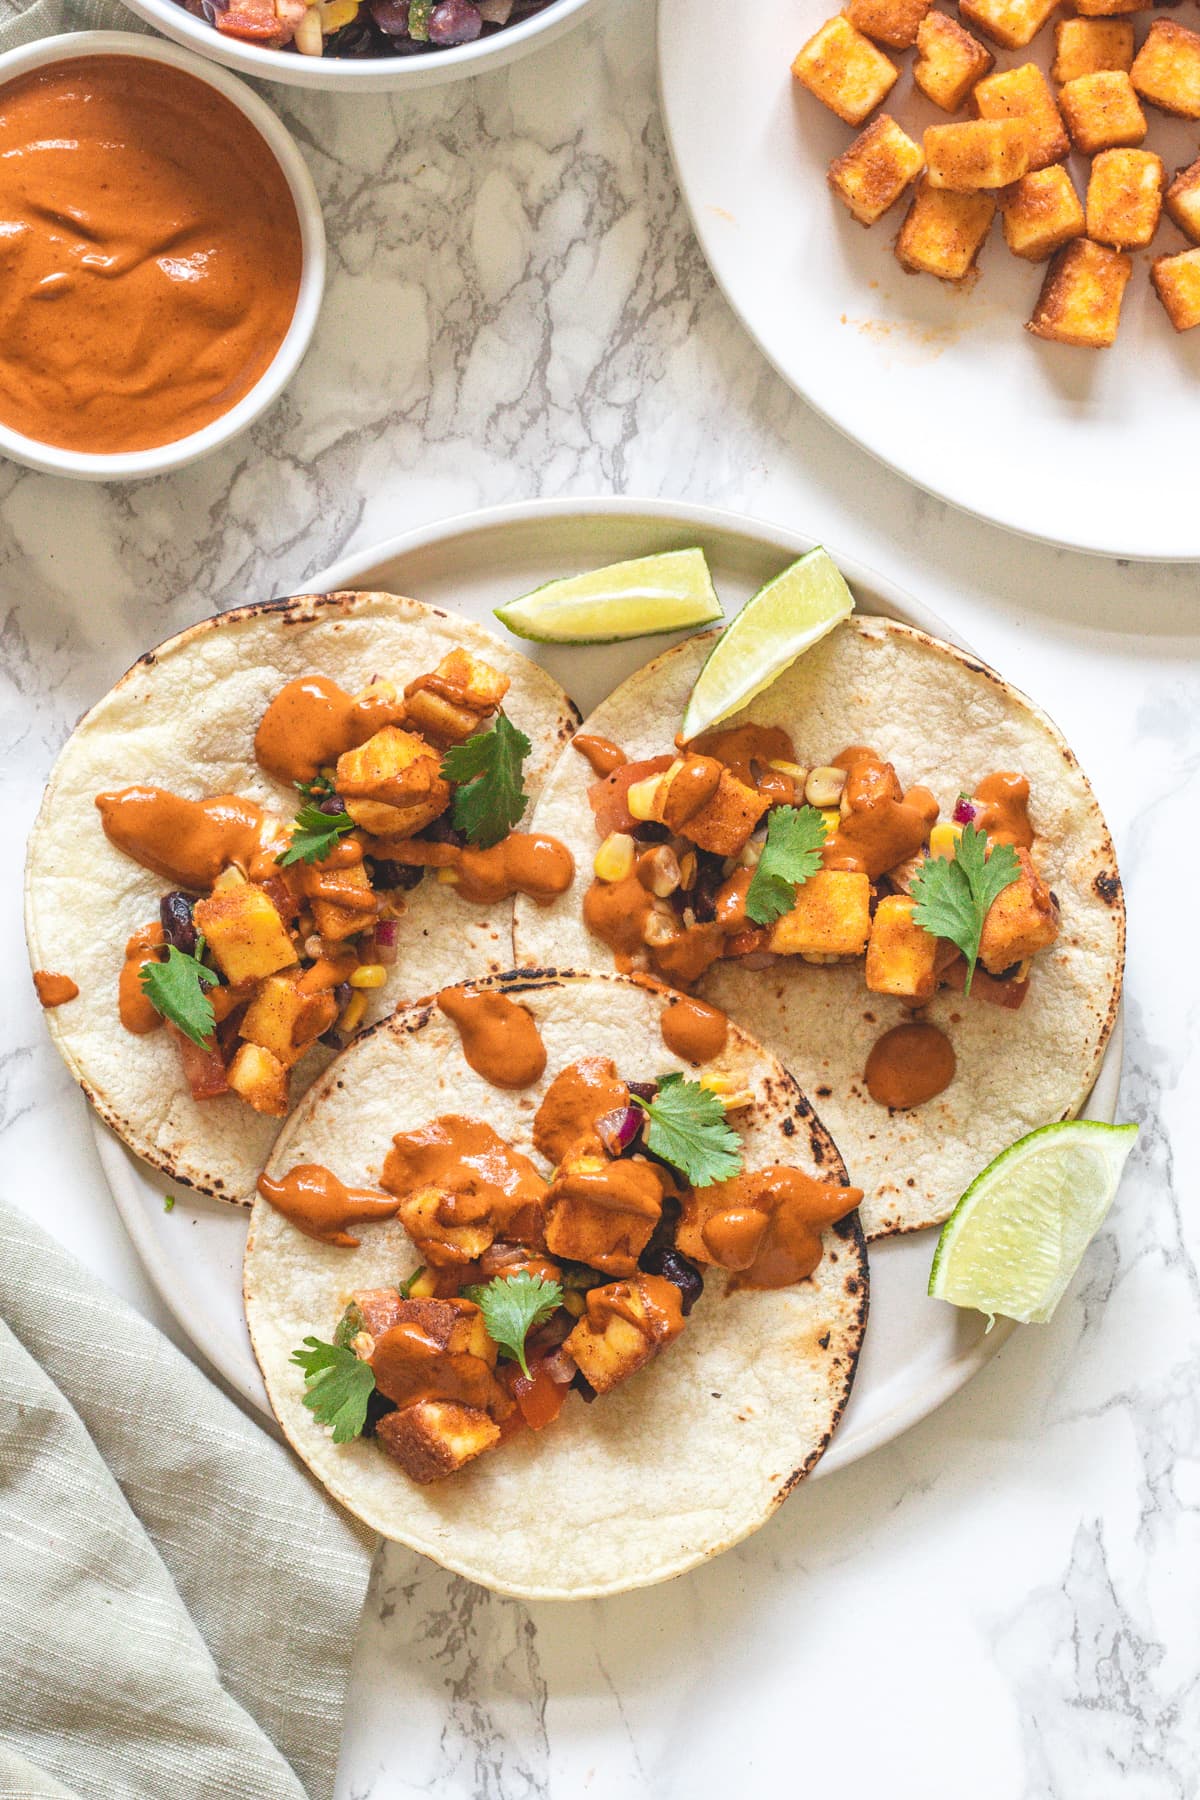 3 Paneer tacos in a plate with lime wedges, chipotle sauce and paneer on the side.